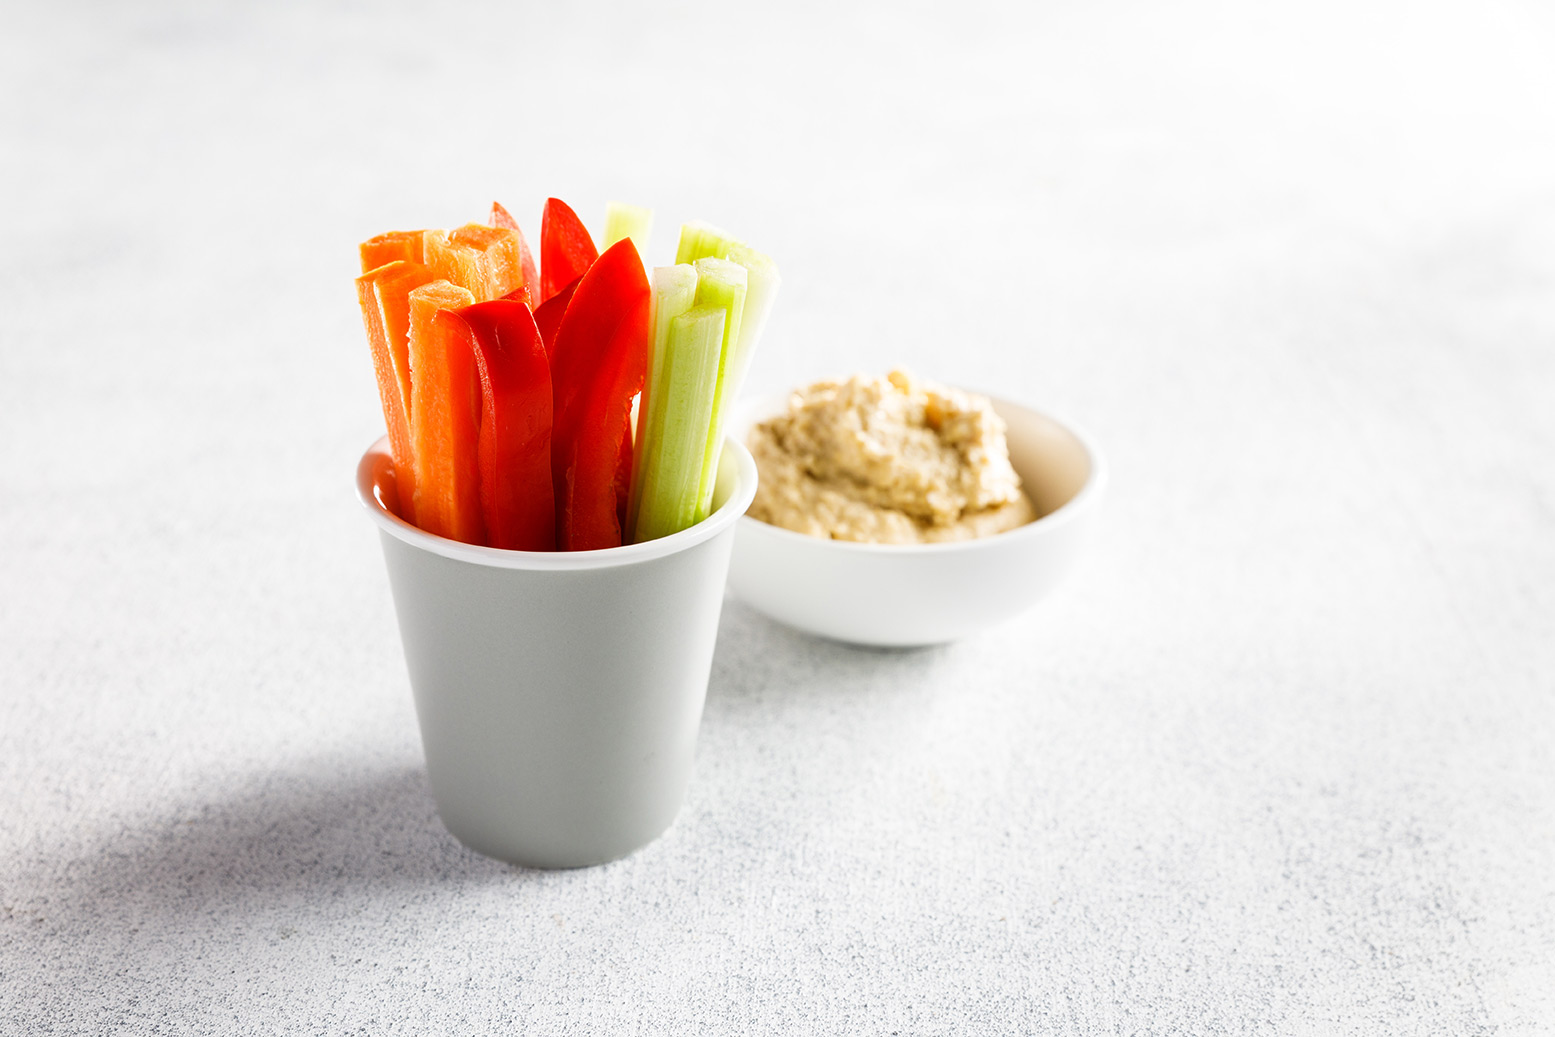 Image of carrot celery and red capsicum sticks standing in a white serving cup with hummus in a small white bowl on the side